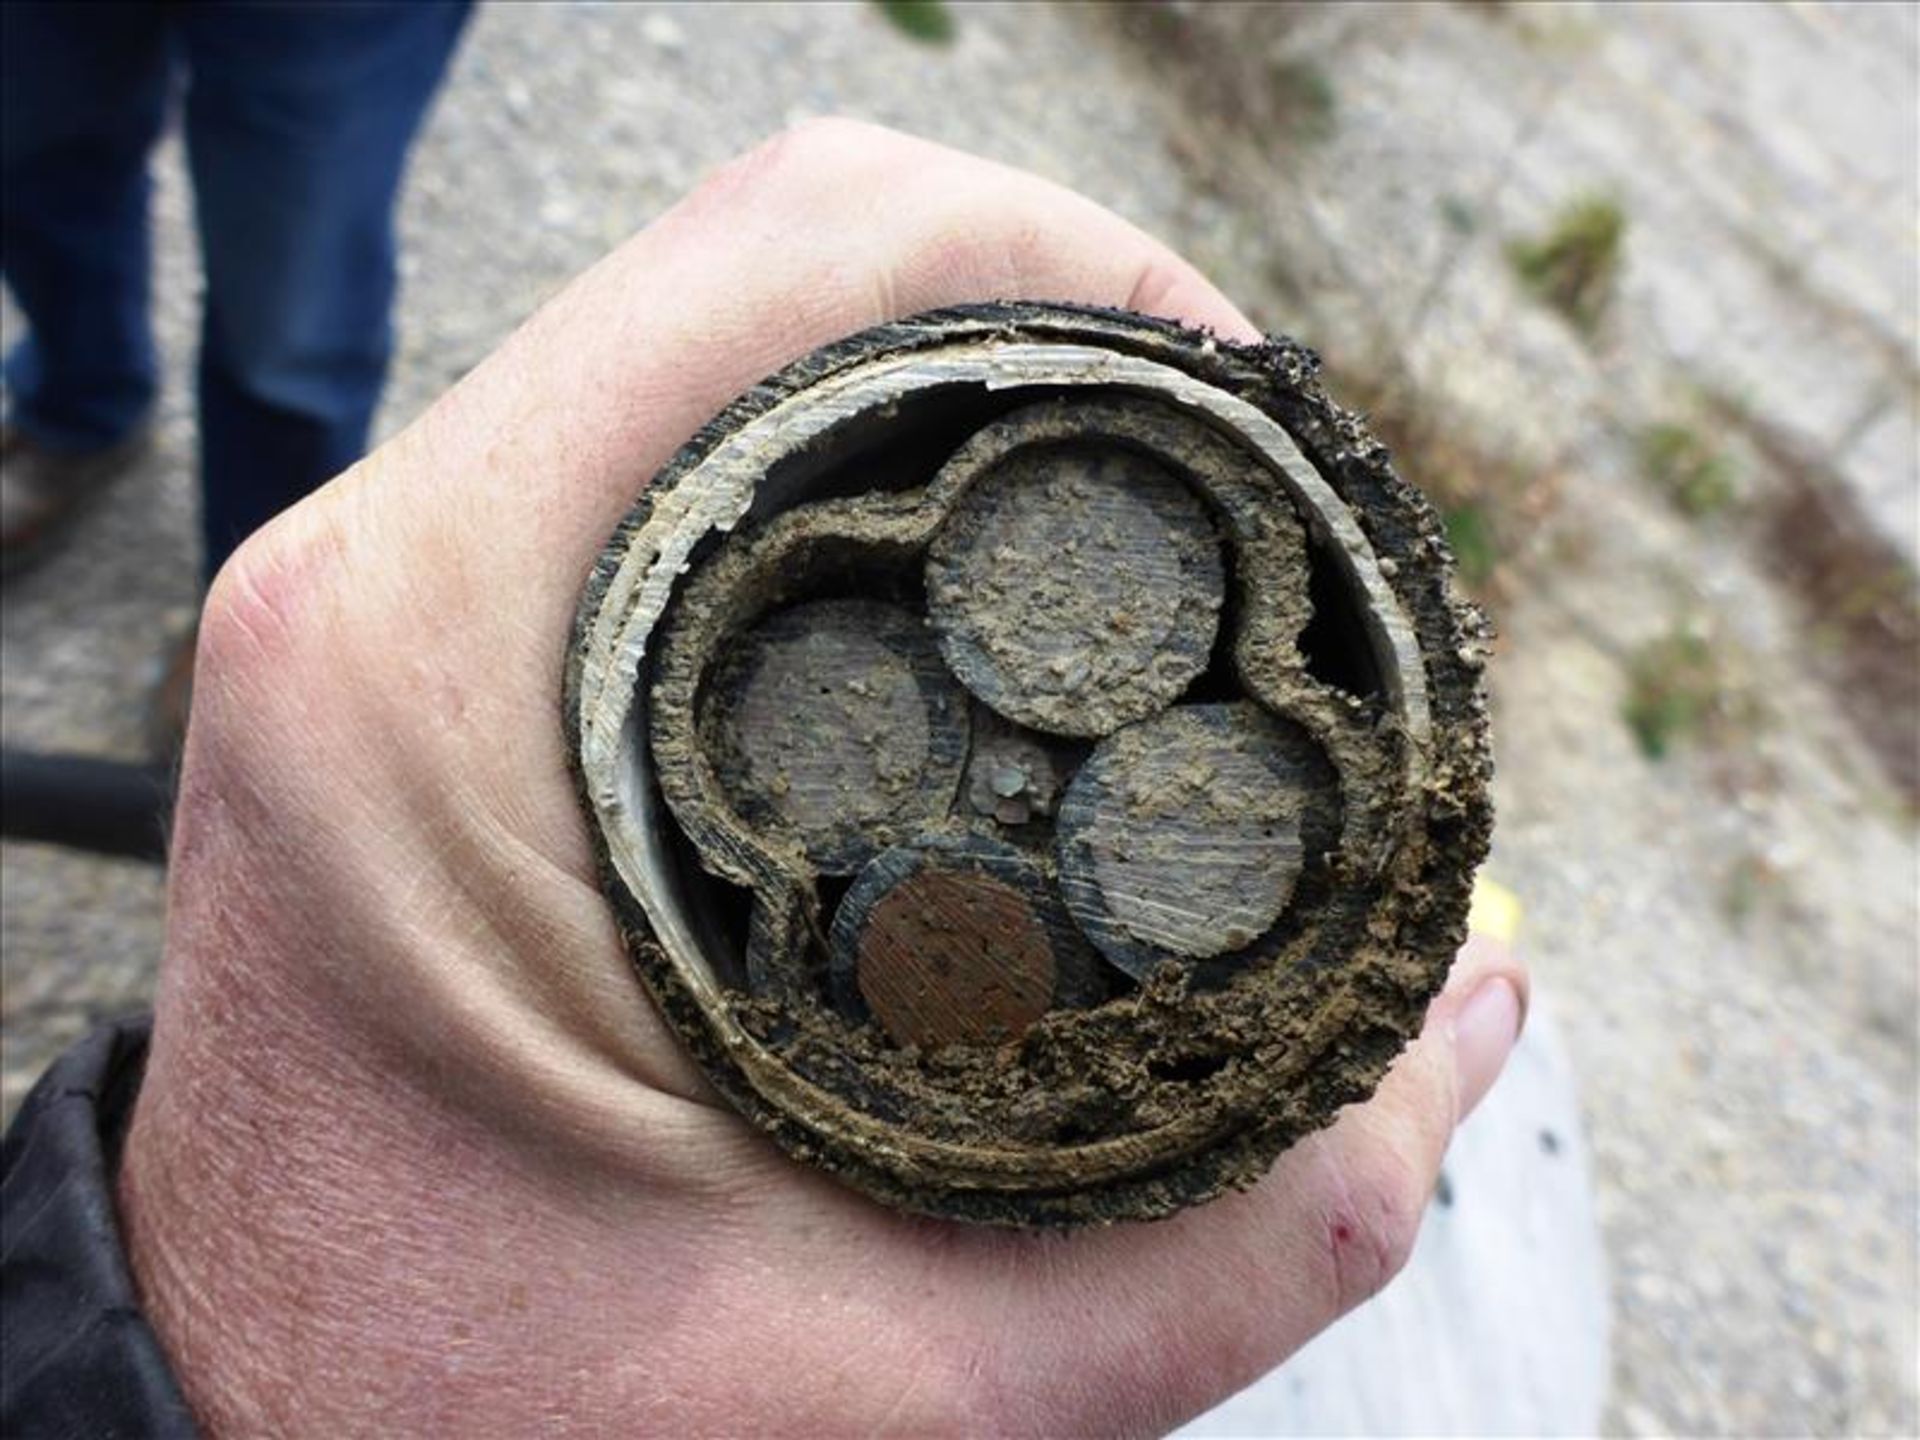 reel of electrical cable, approx. 40 ft., General Cable CC Rand MI AC Flame Check VV AG14 FT1 FT4 HL - Image 2 of 2